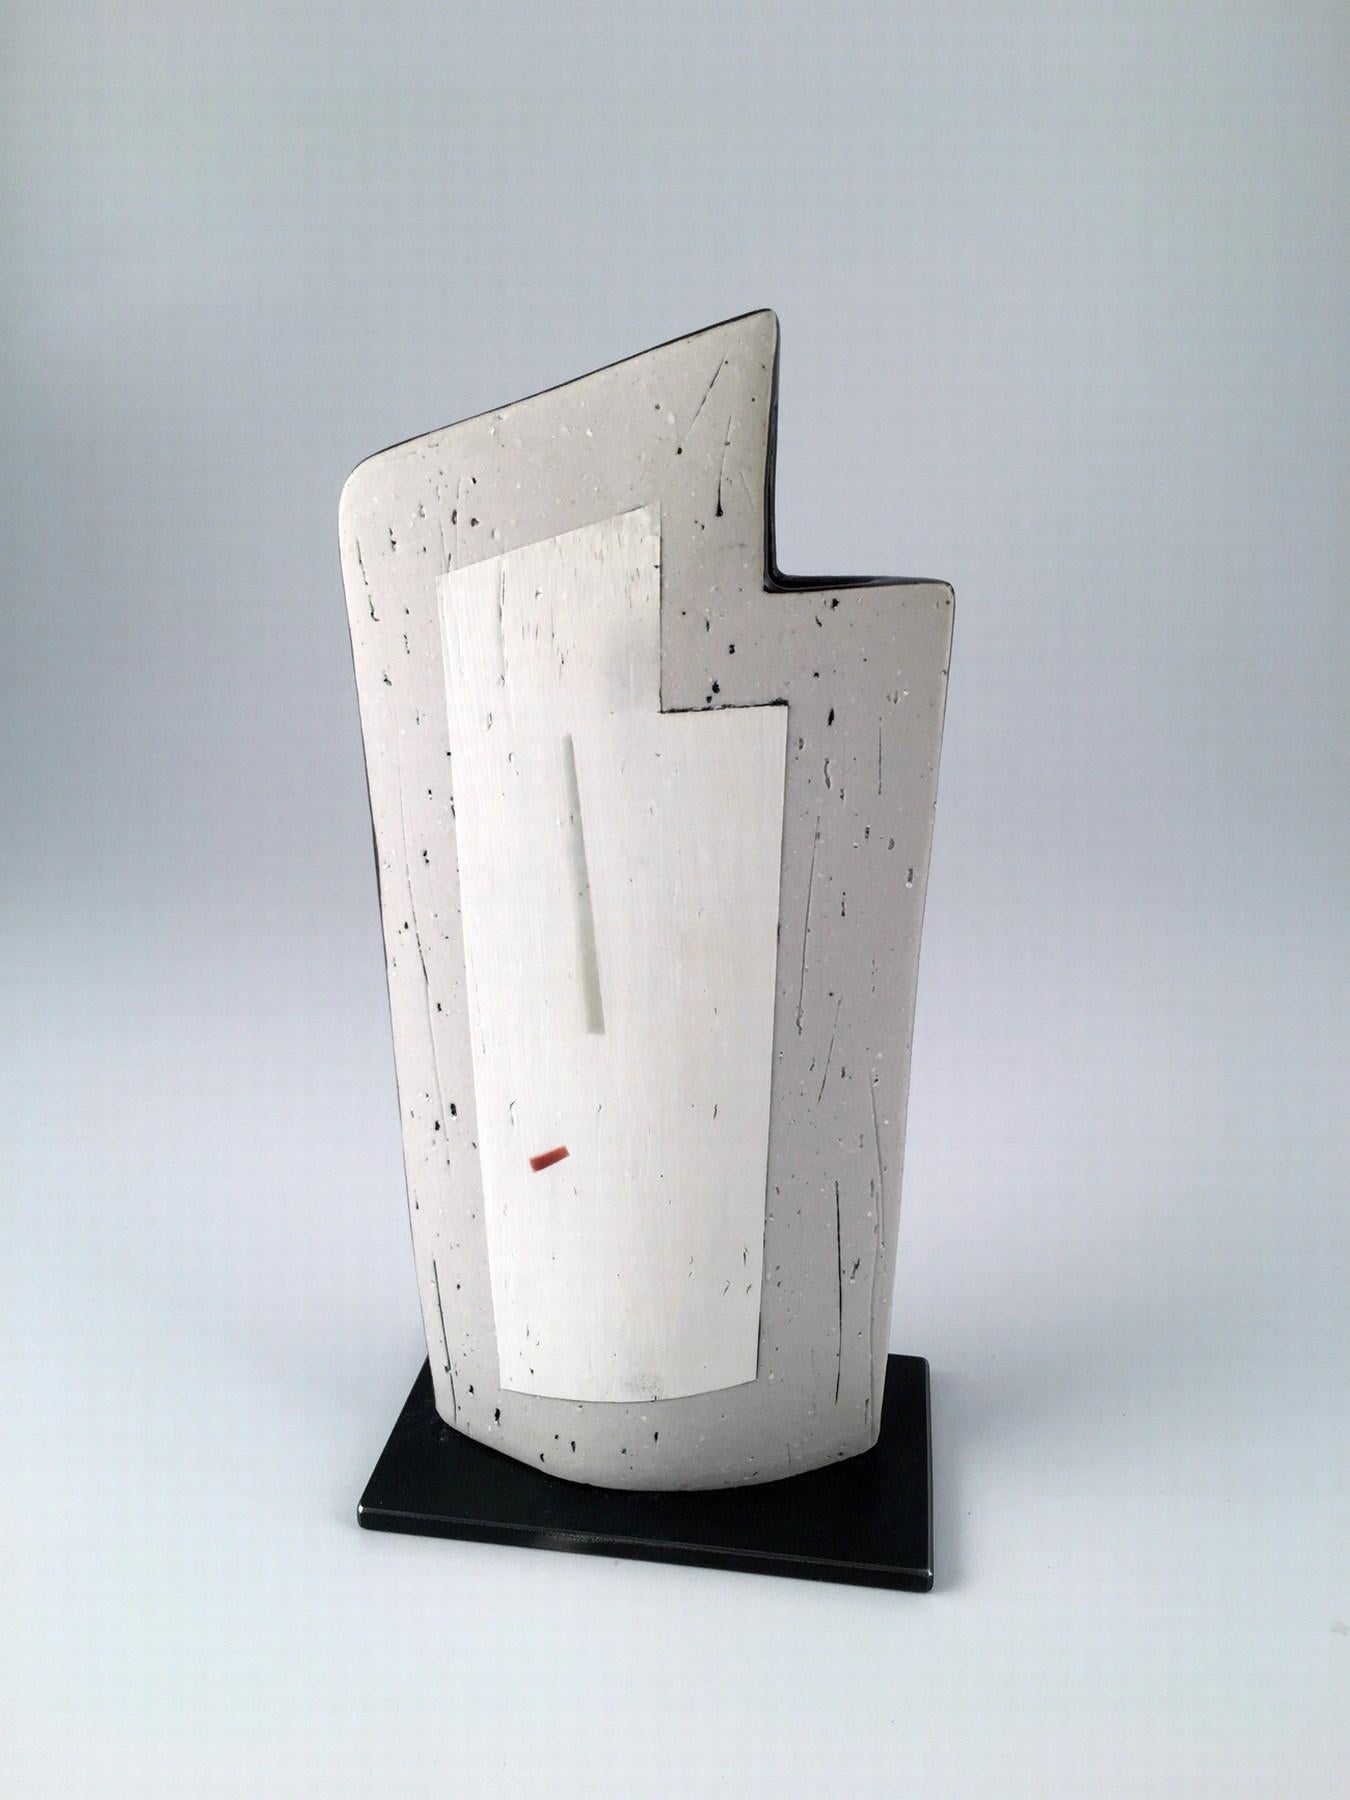 Untitled Vessel "L" shaped opening - Sculpture by Harris Deller